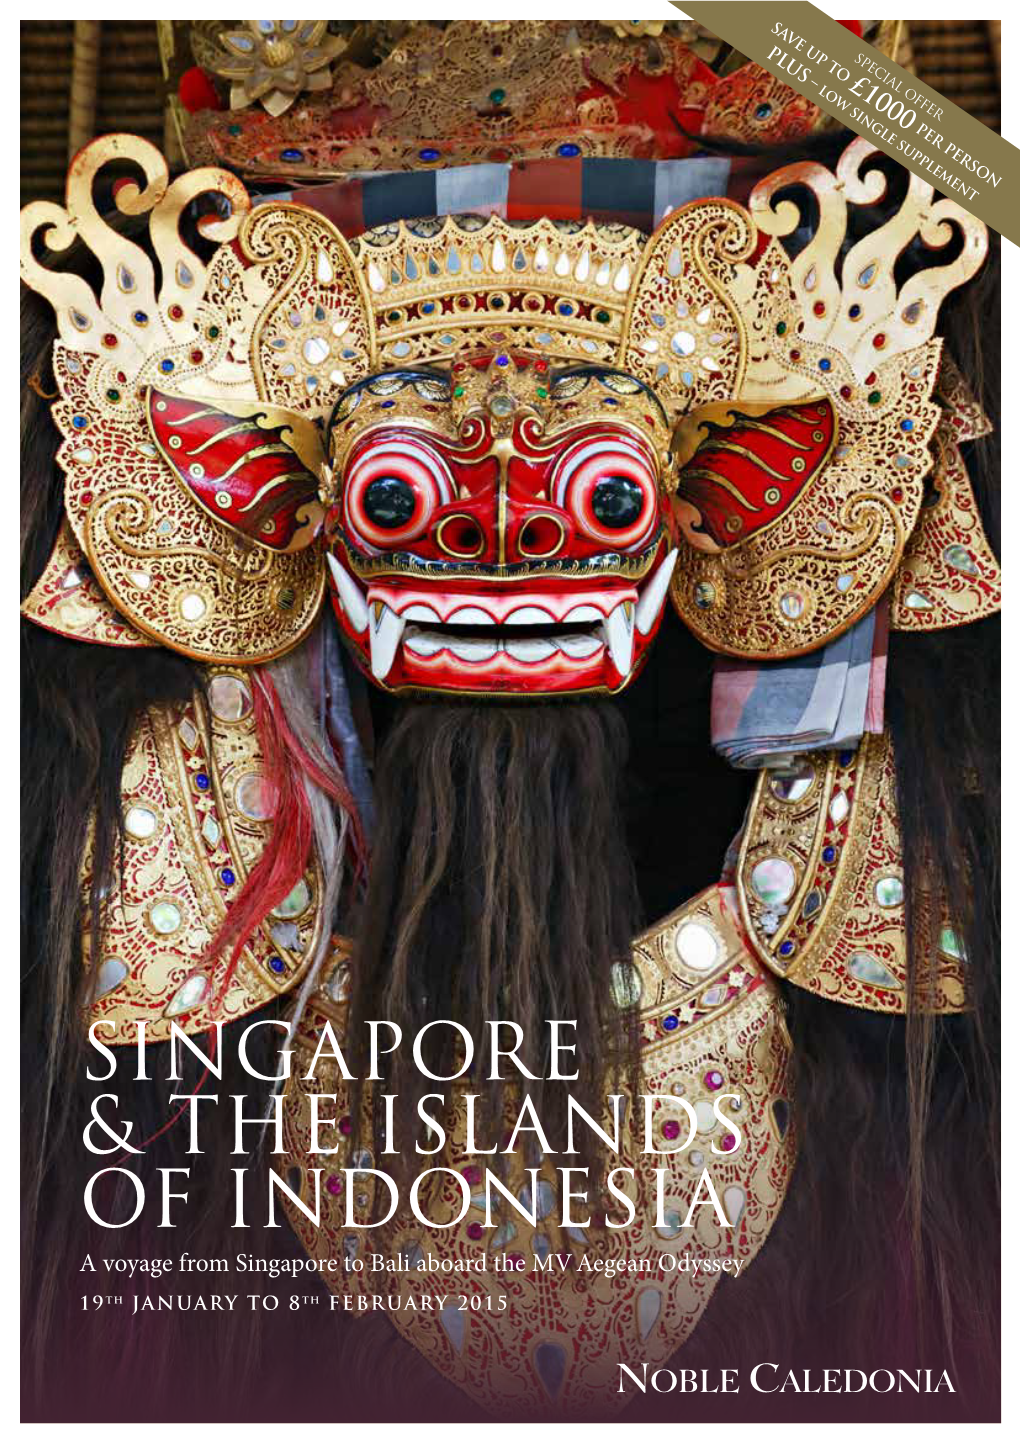 Singapore & the Islands of Indonesia